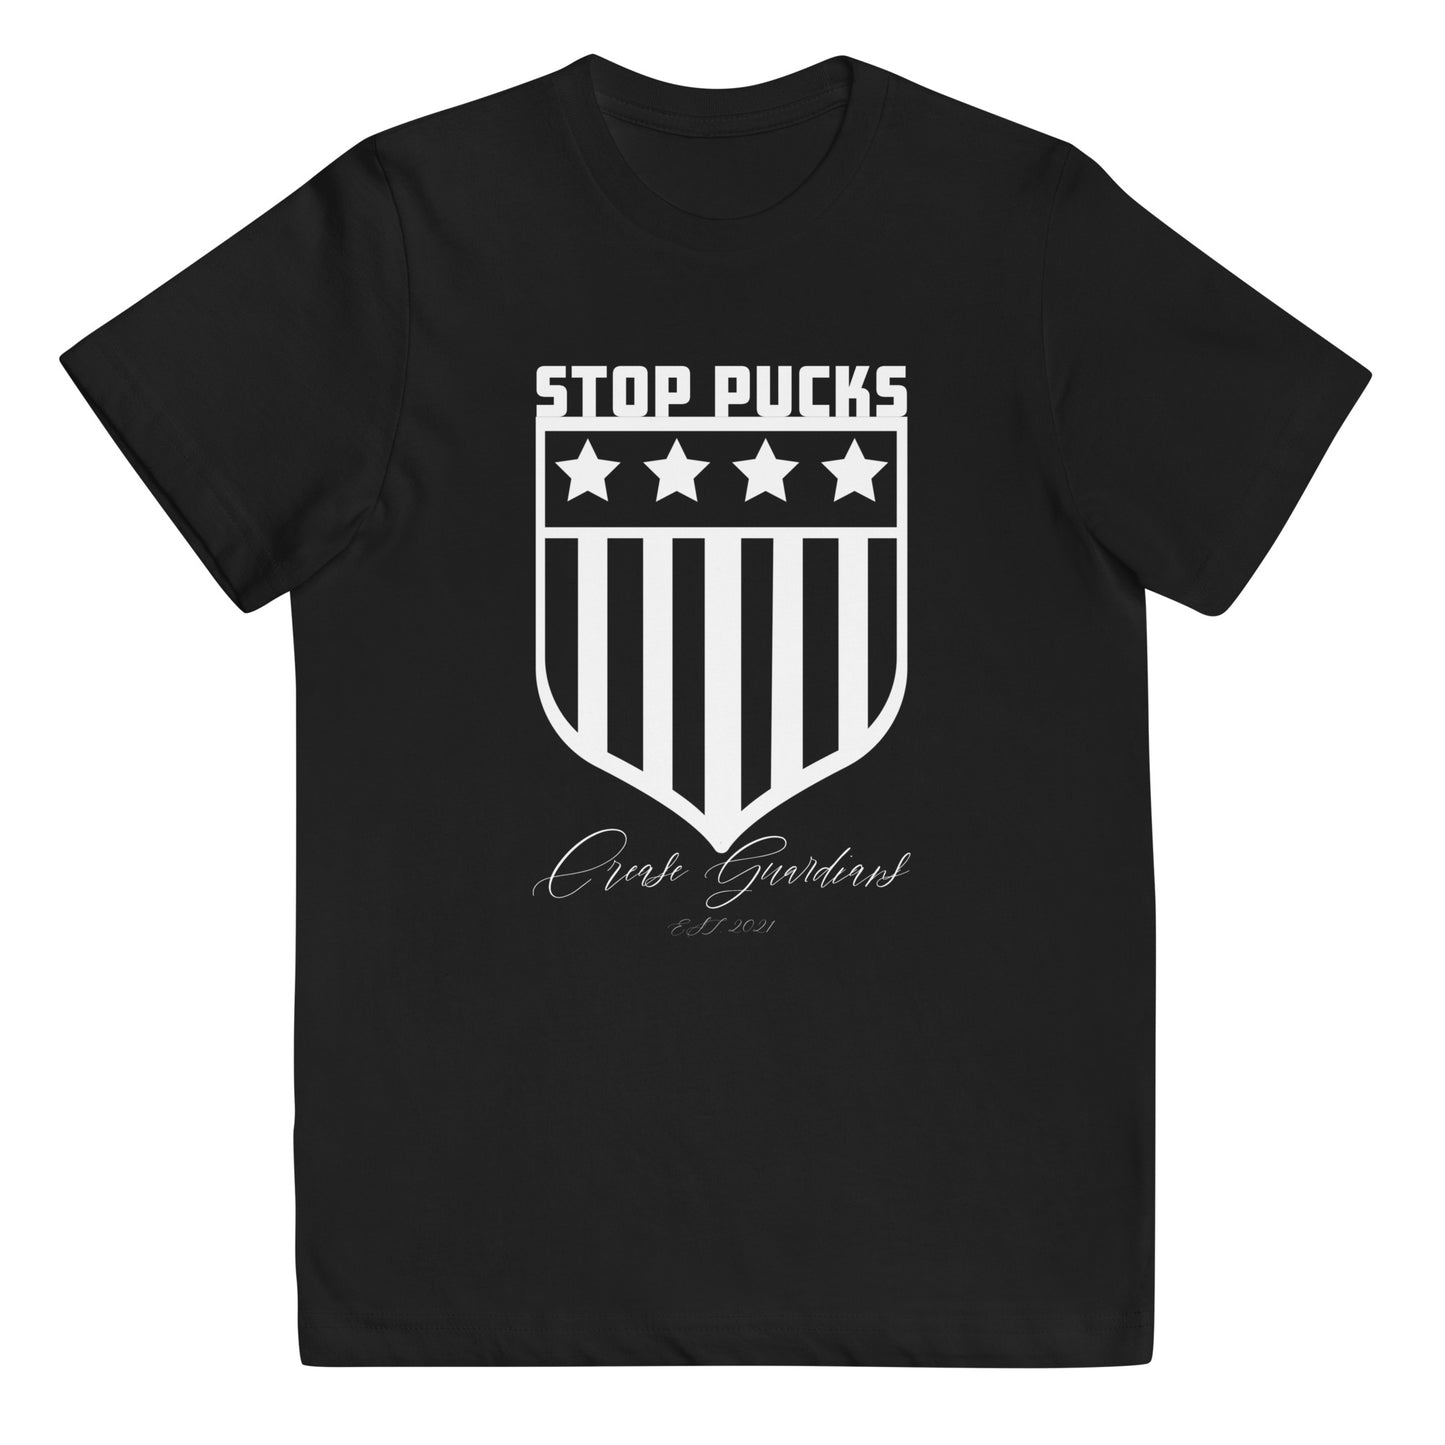 The Shield Youth jersey t-shirt